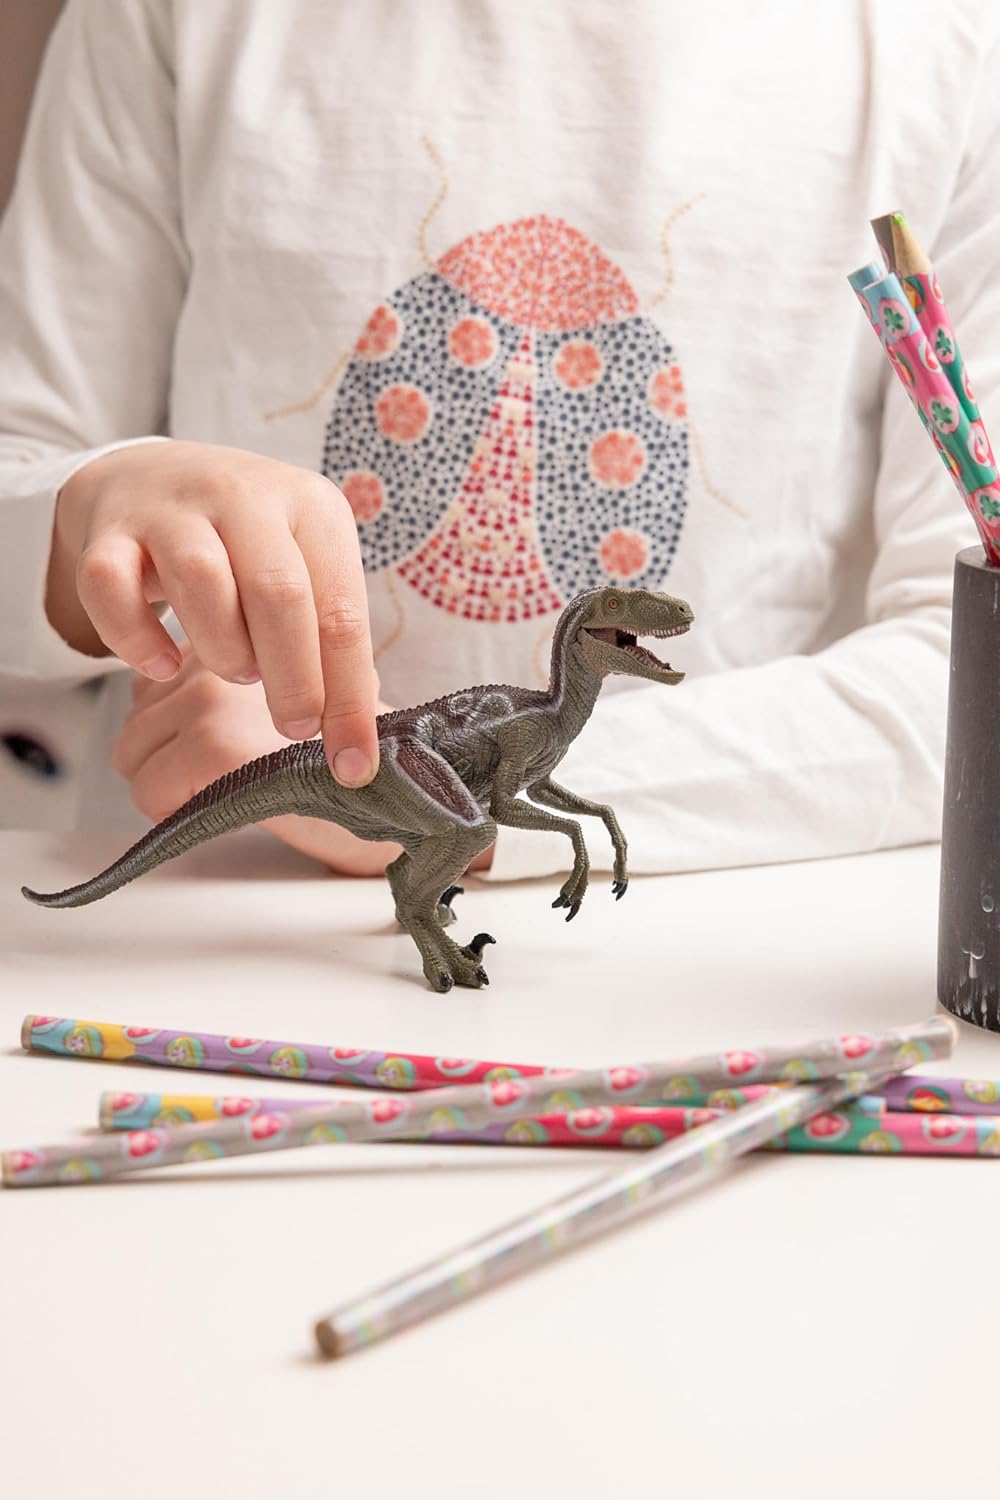 Velociraptor Dinosaur Replica Toy being played with child, with colorful pencils surrounding the toy